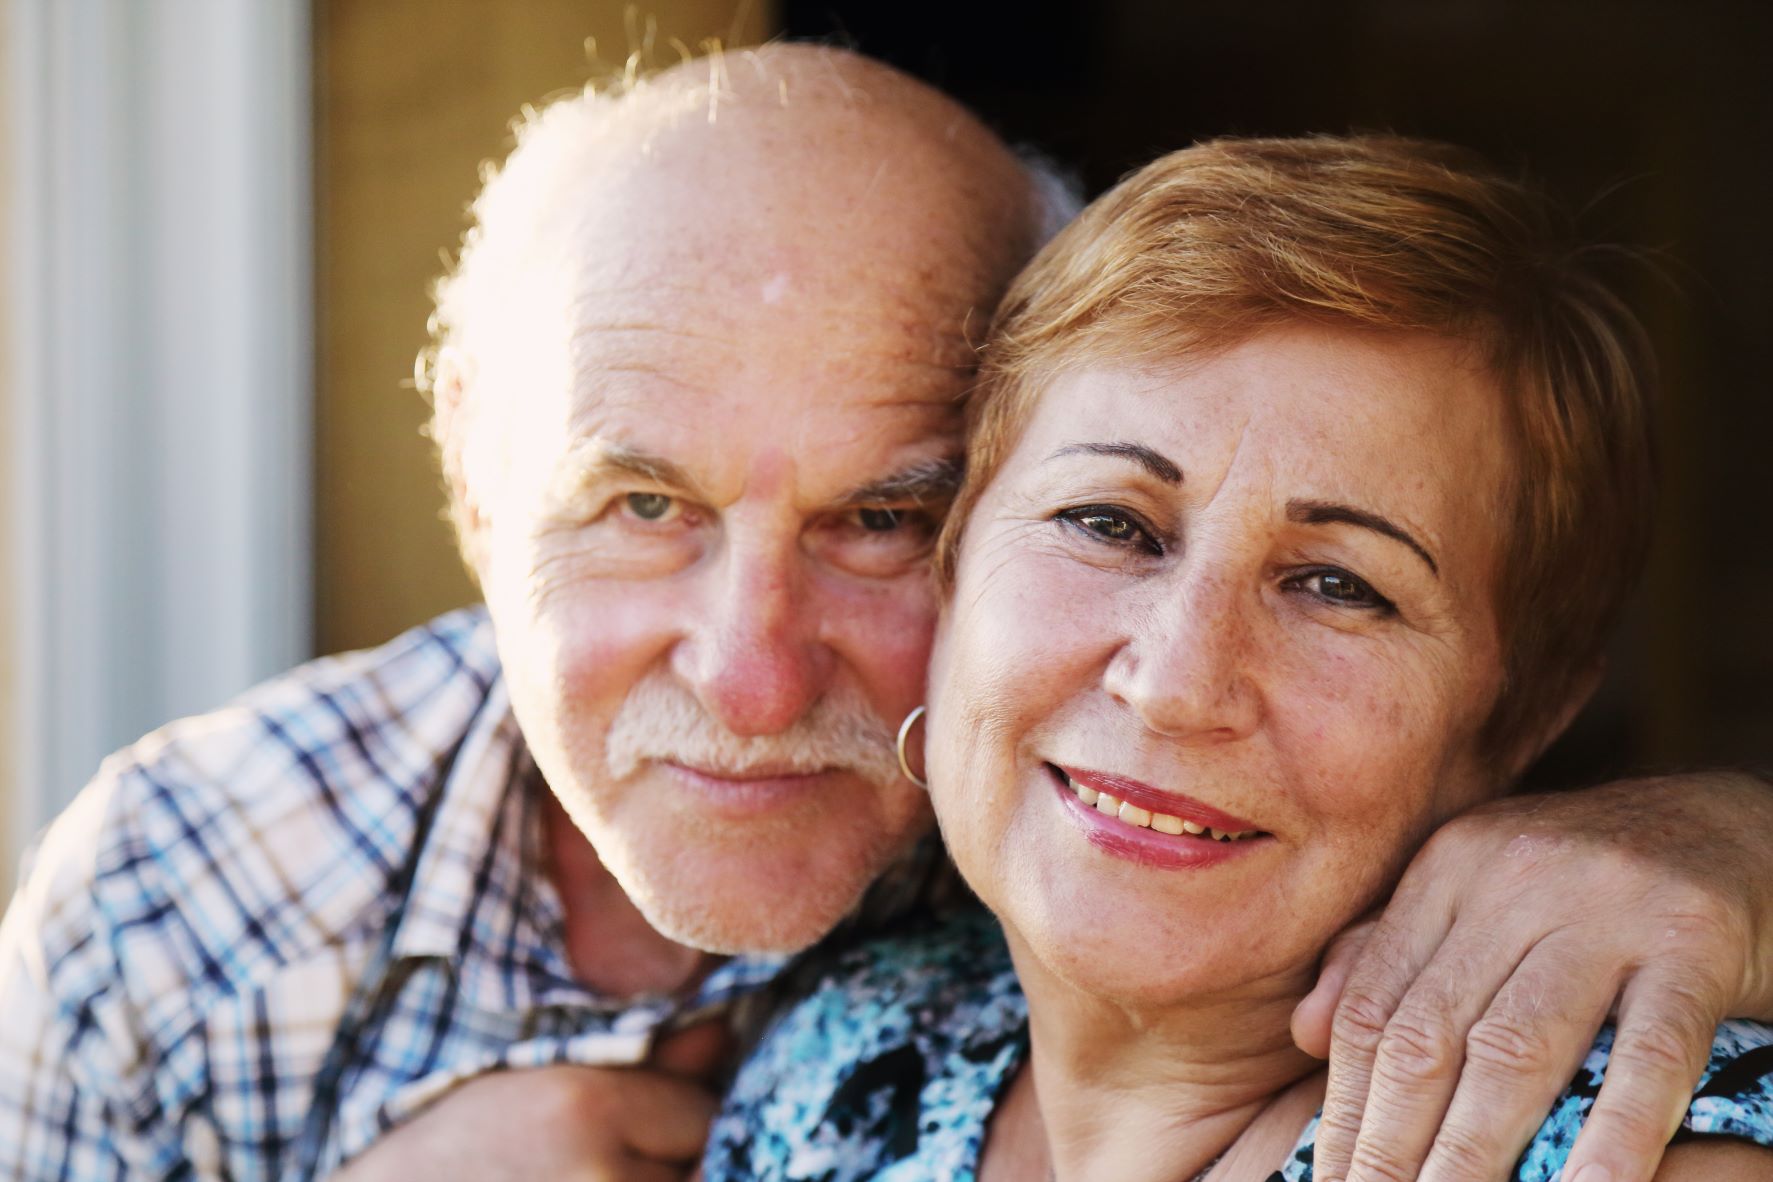 Elderly couple smiling and embracing in close-up, expressing affection and contentment.